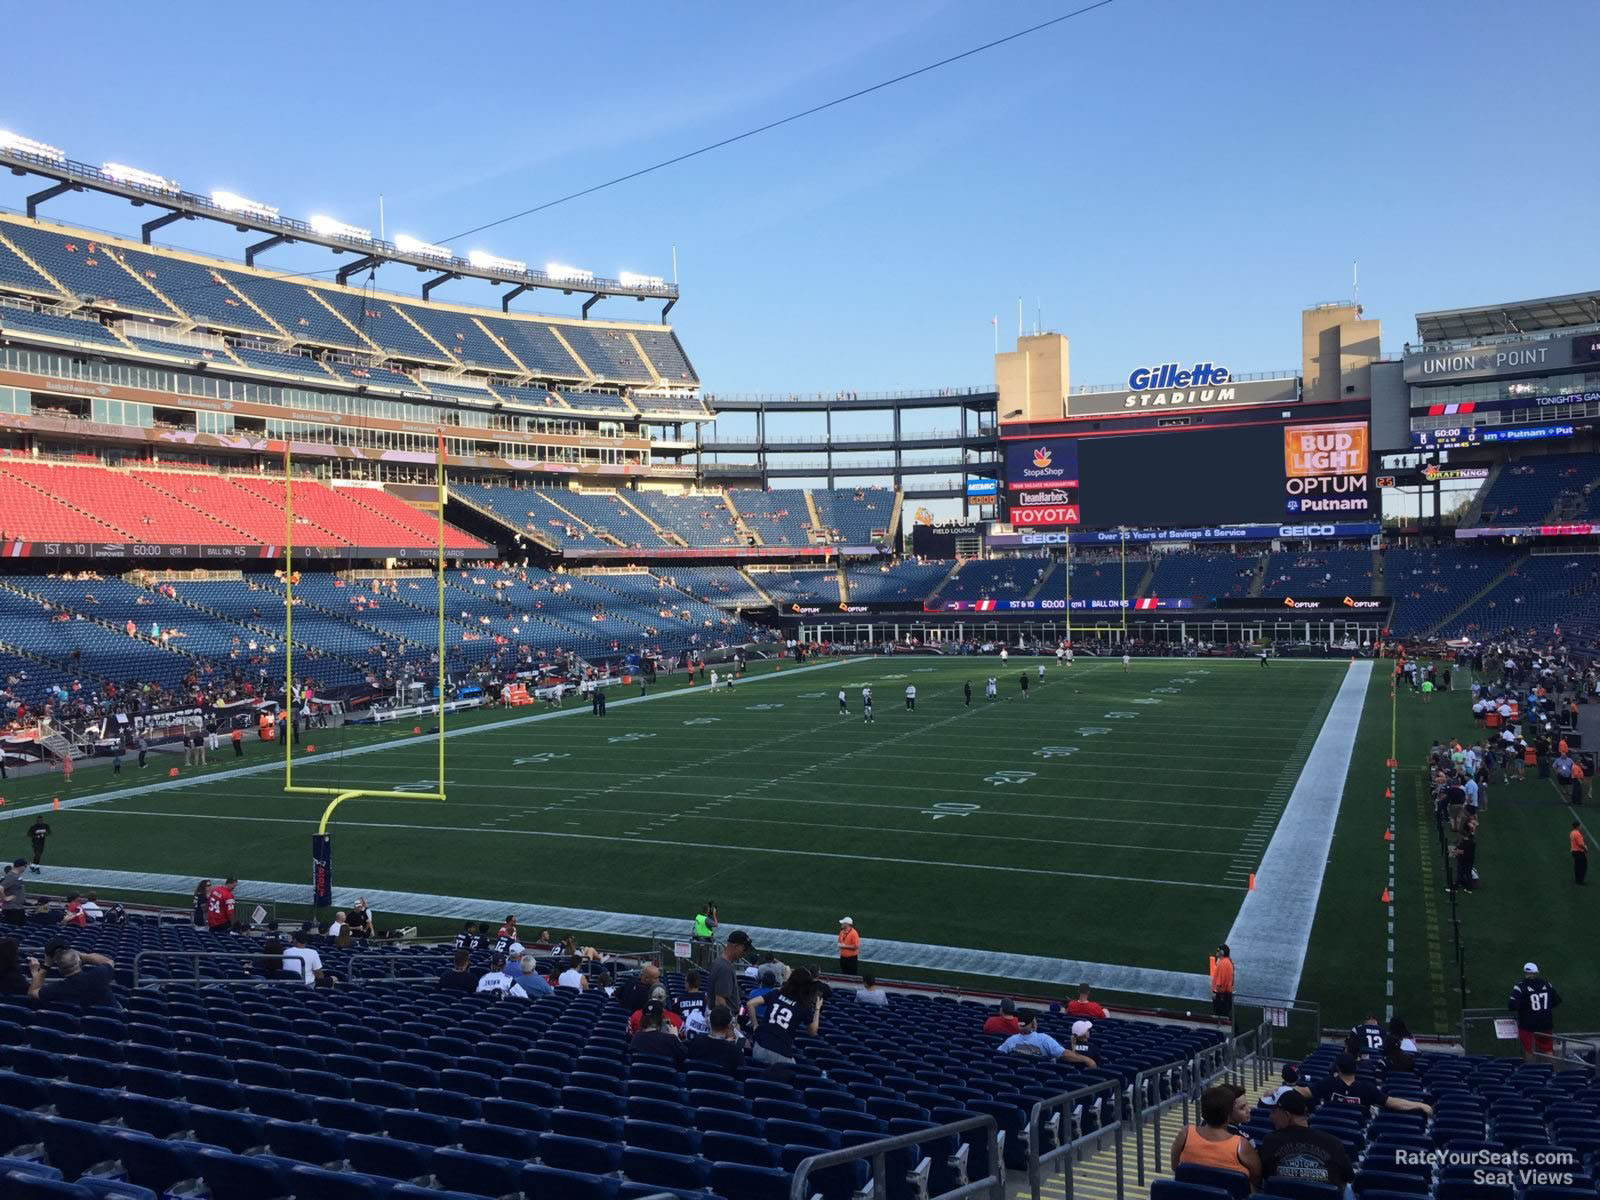 section 140, row 29 seat view  for football - gillette stadium